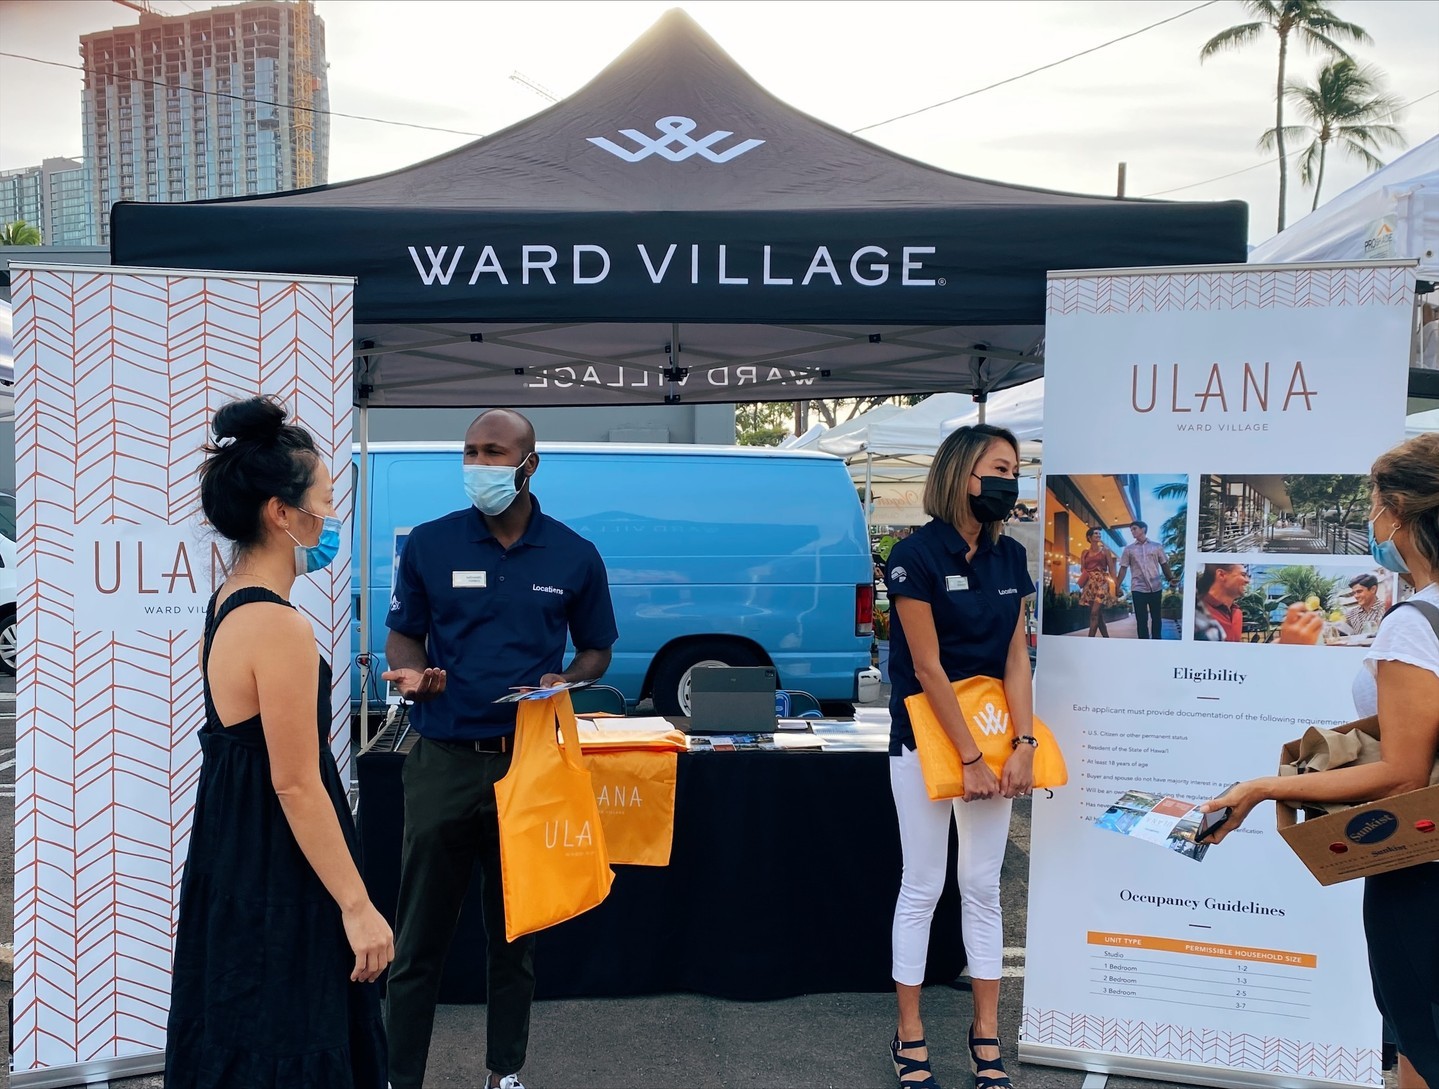 Mahalo to everyone who stopped by to say hi last weekend! The Ulana Ward Village team will be at the Kaka‘ako Farmers Market again this Saturday, November 20. Pick up an application and learn more about this exciting reserved housing opportunity coming to the neighborhood. Just look for the orange Ulana bags! They also come in handy as your shop the market for fresh produce, tropical flowers and locally-made treats. This reserved housing offering is available to Hawai‘i homebuyers who meet HCDA reserved housing criteria, with residences priced from $271,000 to $717,400.